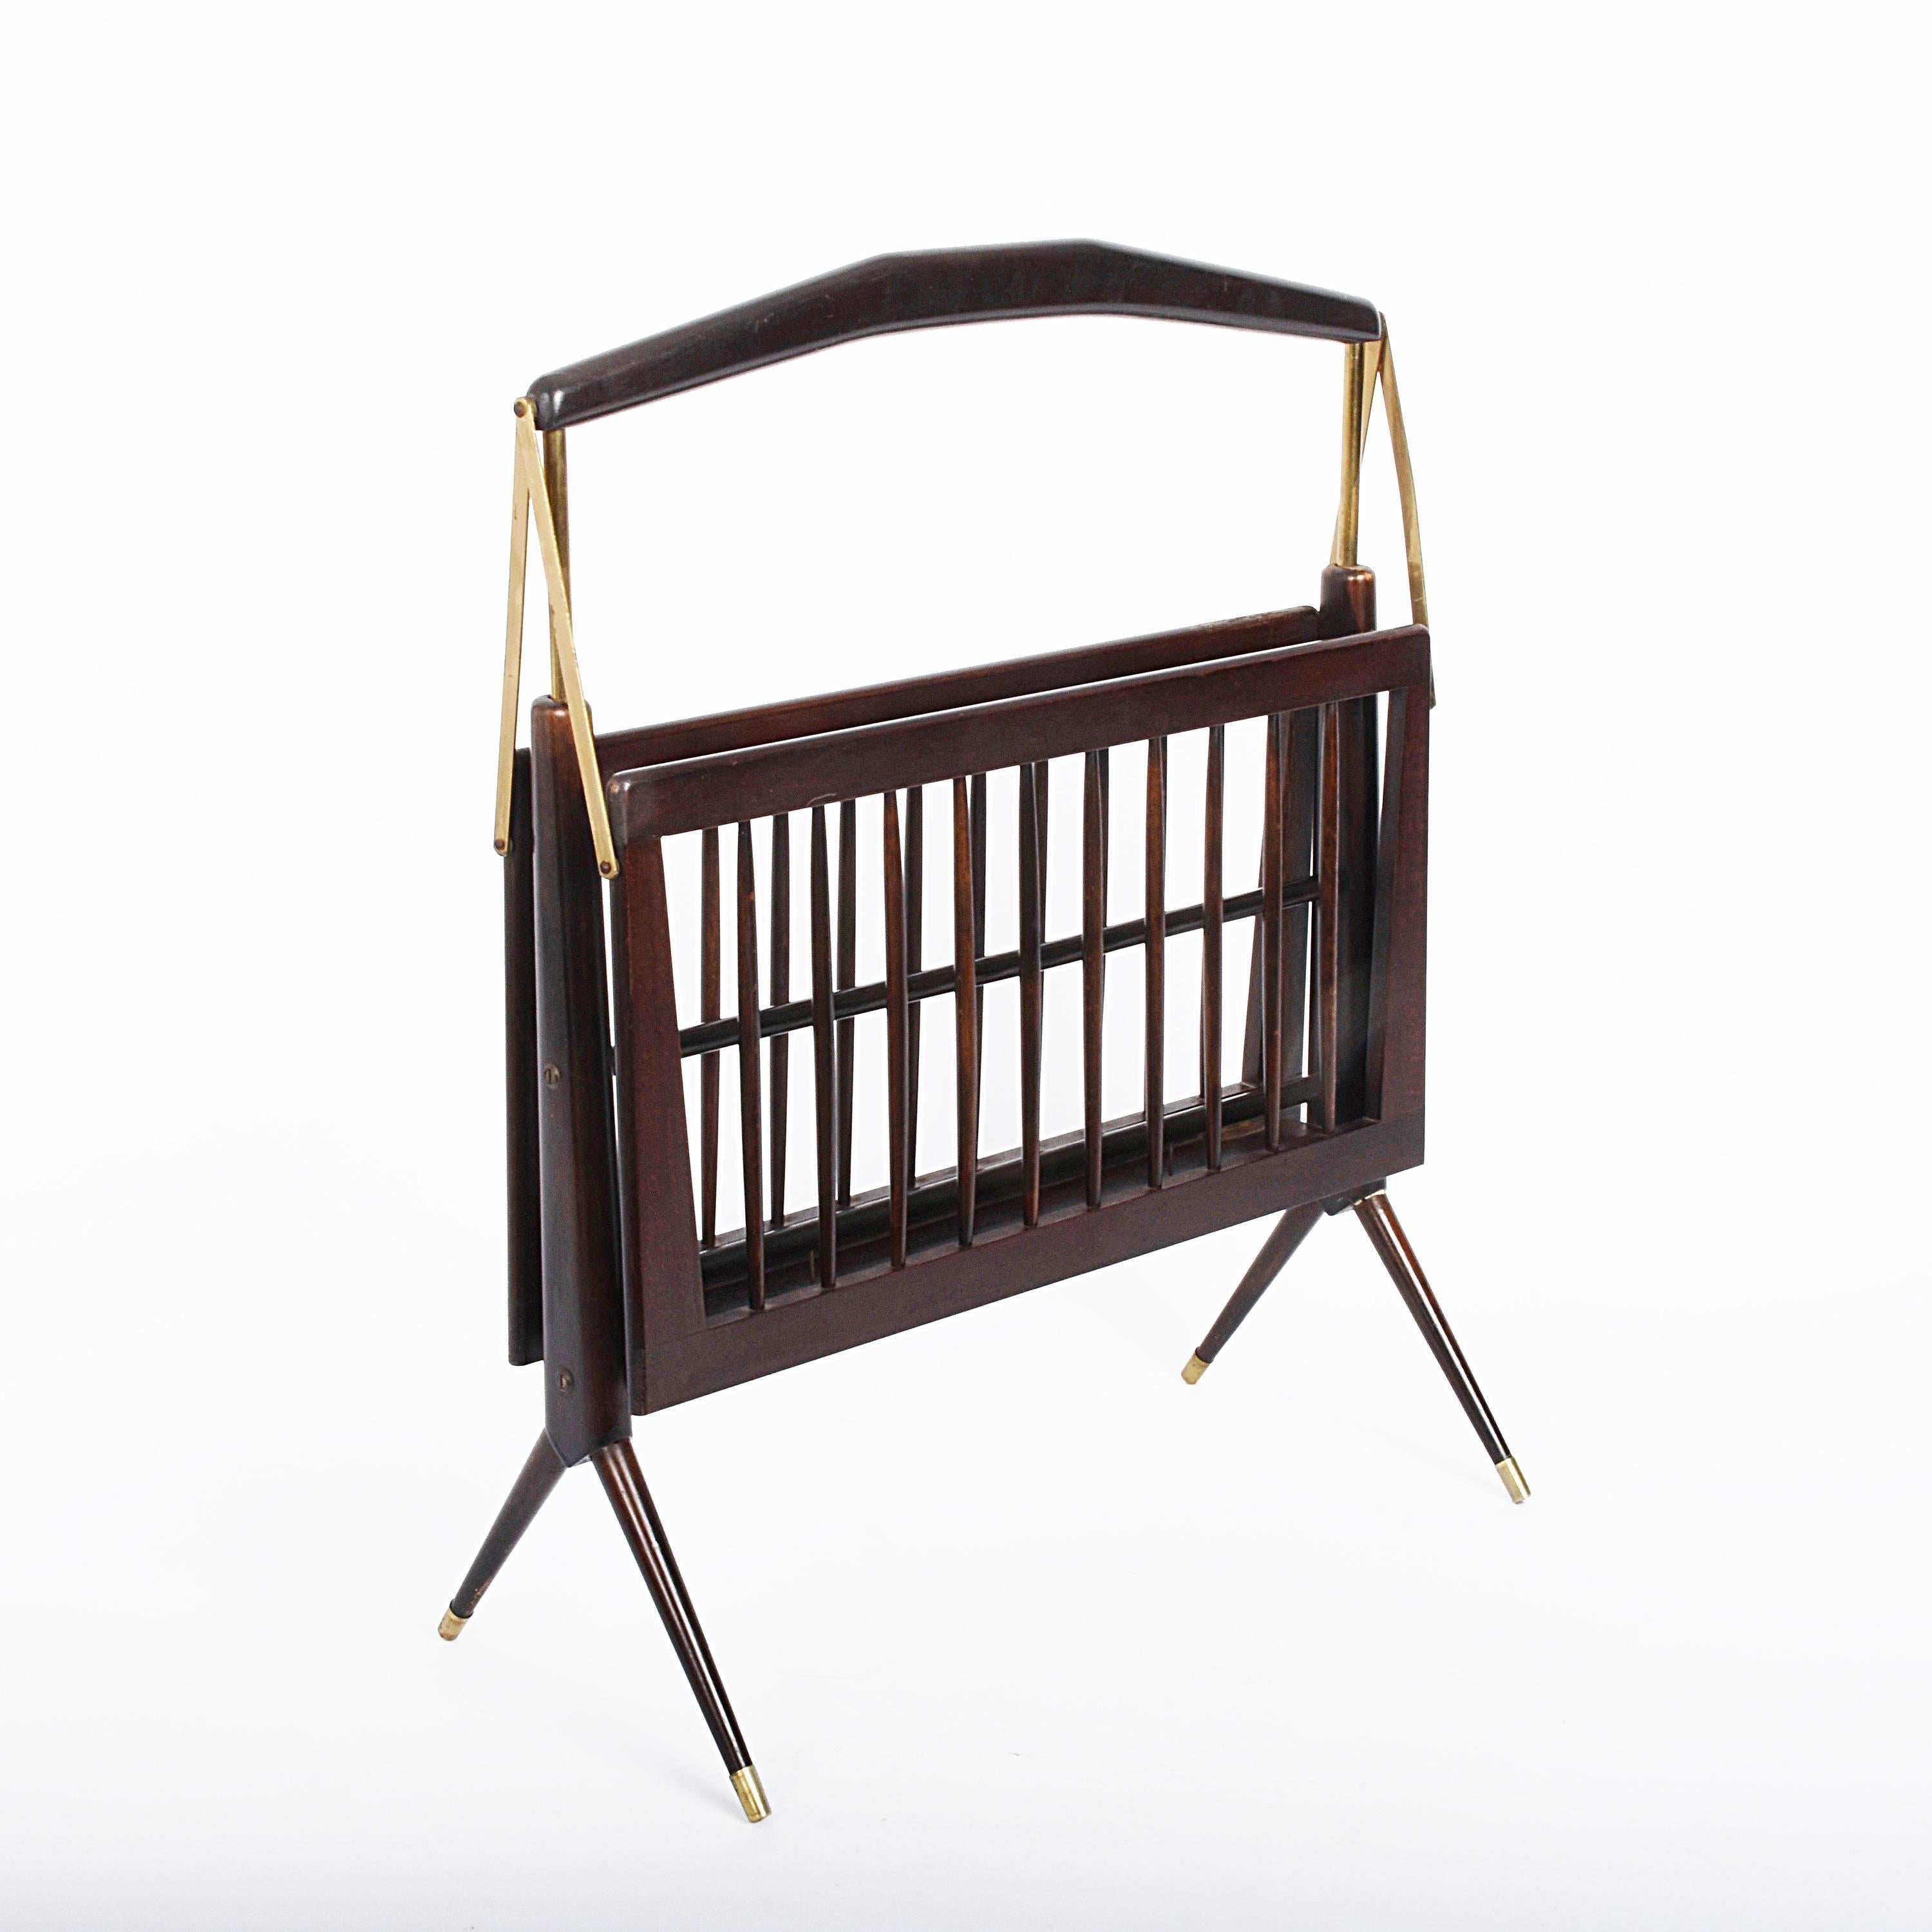 Magazine rack by Cesare Lacca made of lacquered mahogany wood and delicate brass finishing. and produced in Milan.

This elegant and slender magazine holder has to extendible pieces on the side. A wonderful midcentury Milan production, that will